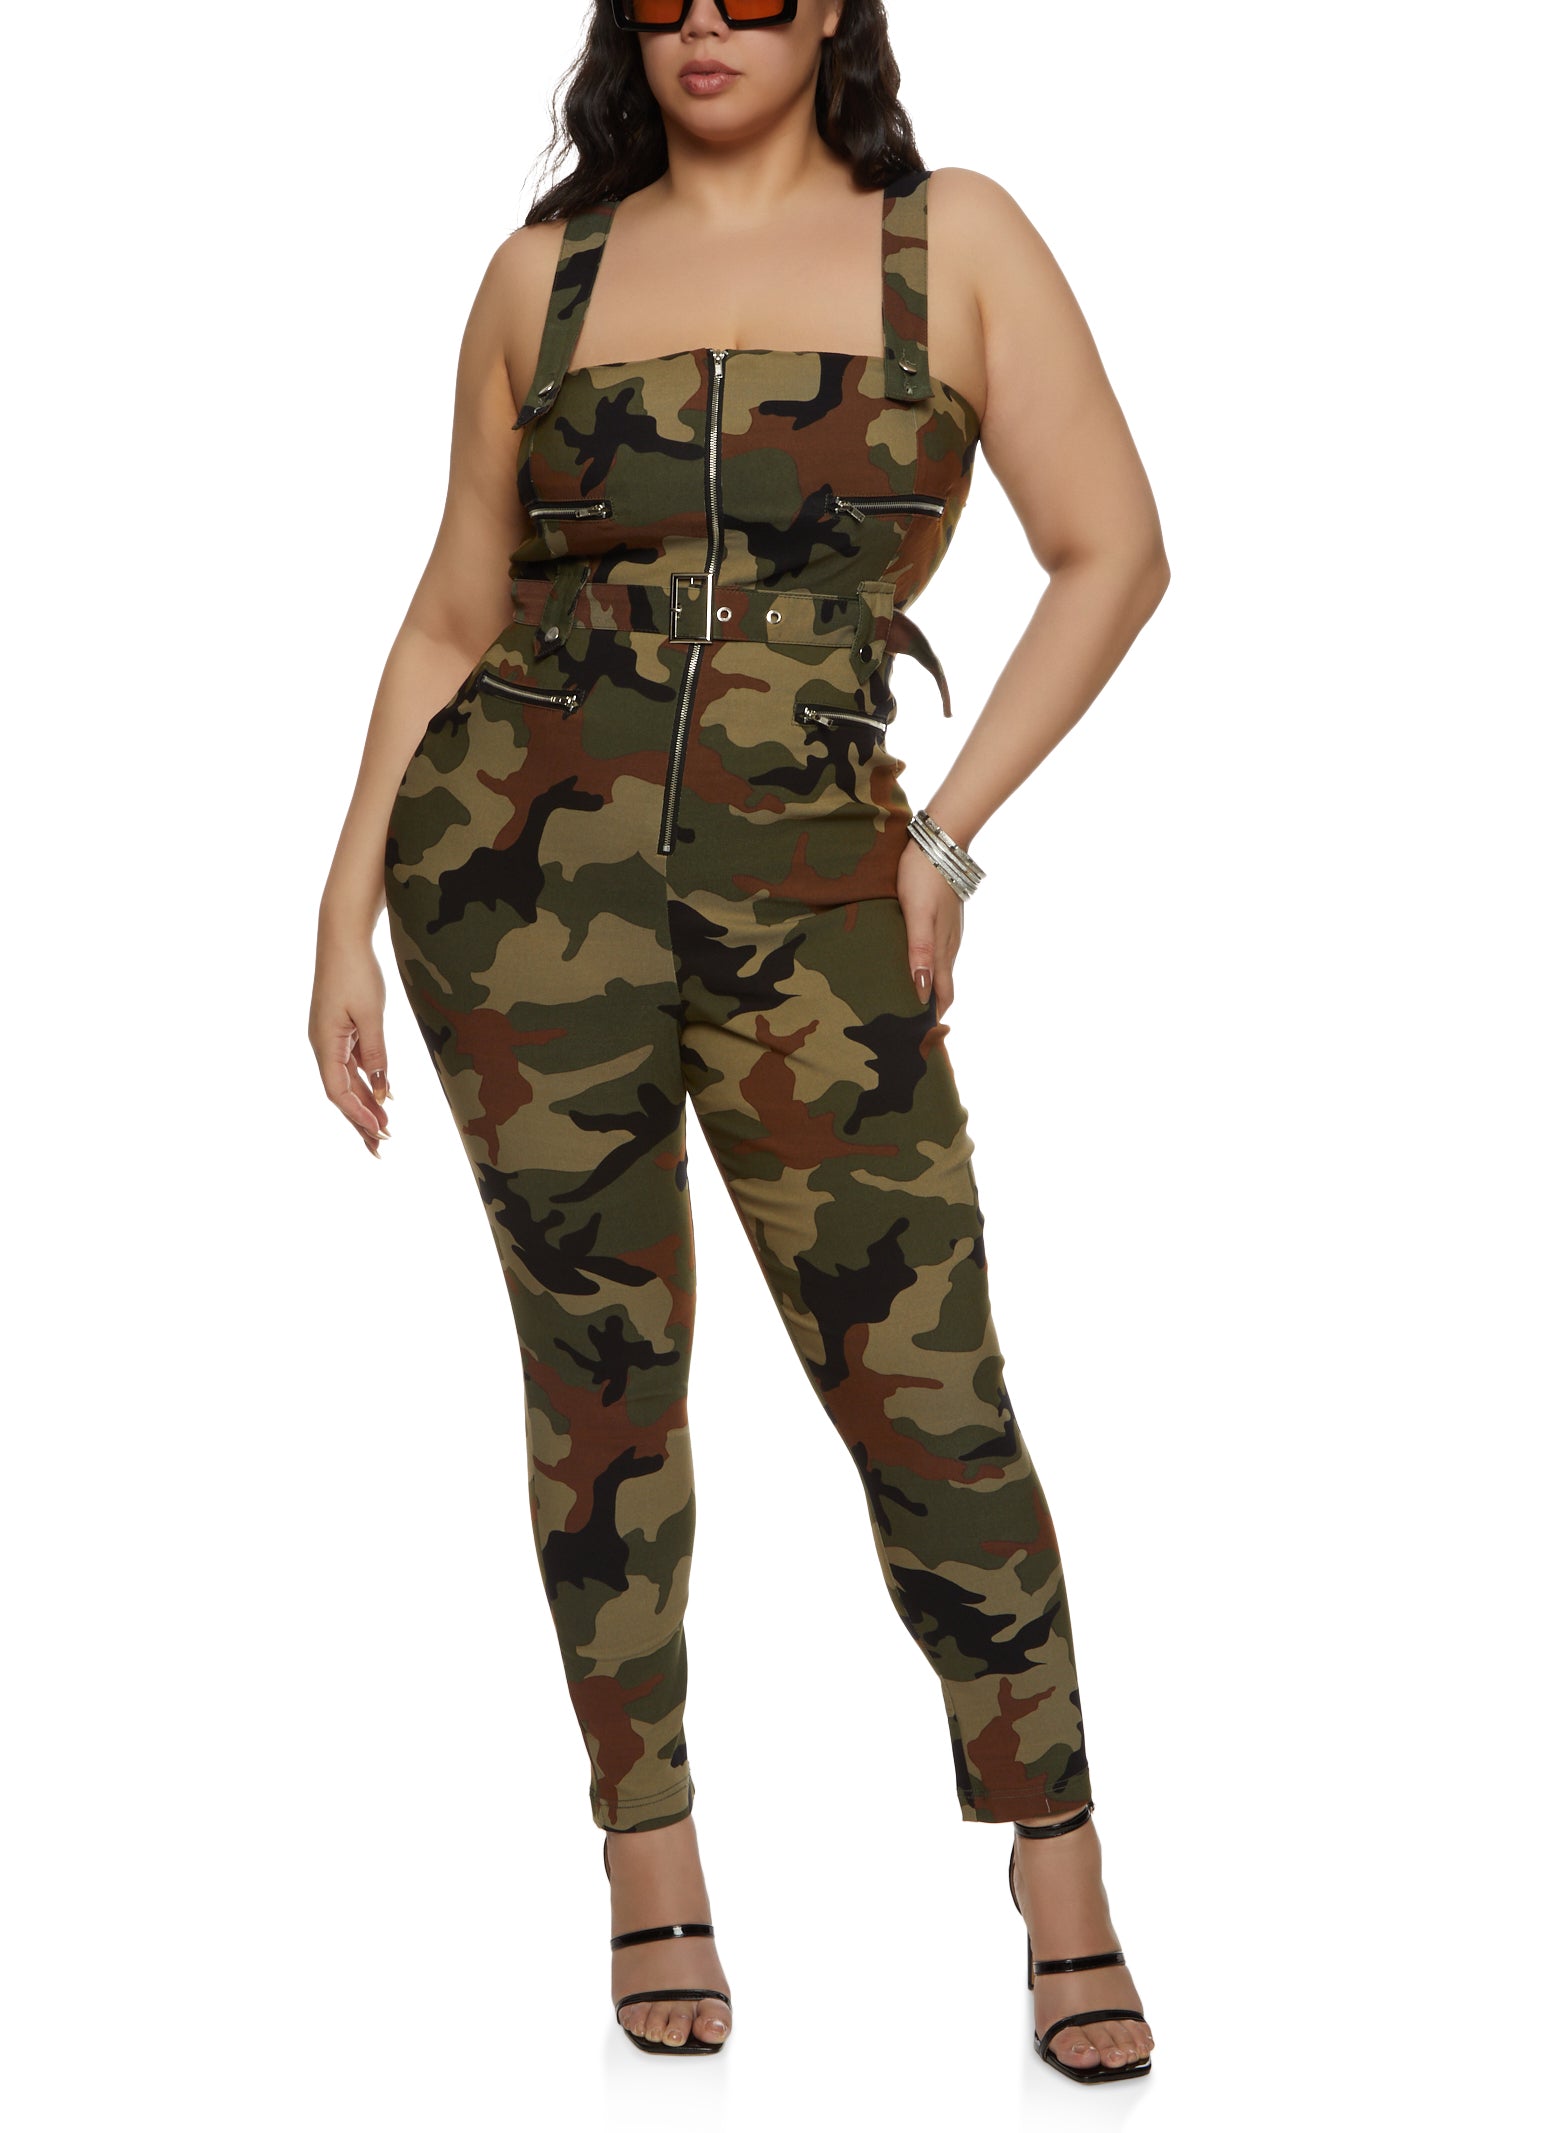 Plus Size Green Jumpsuits, Everyday Low Prices